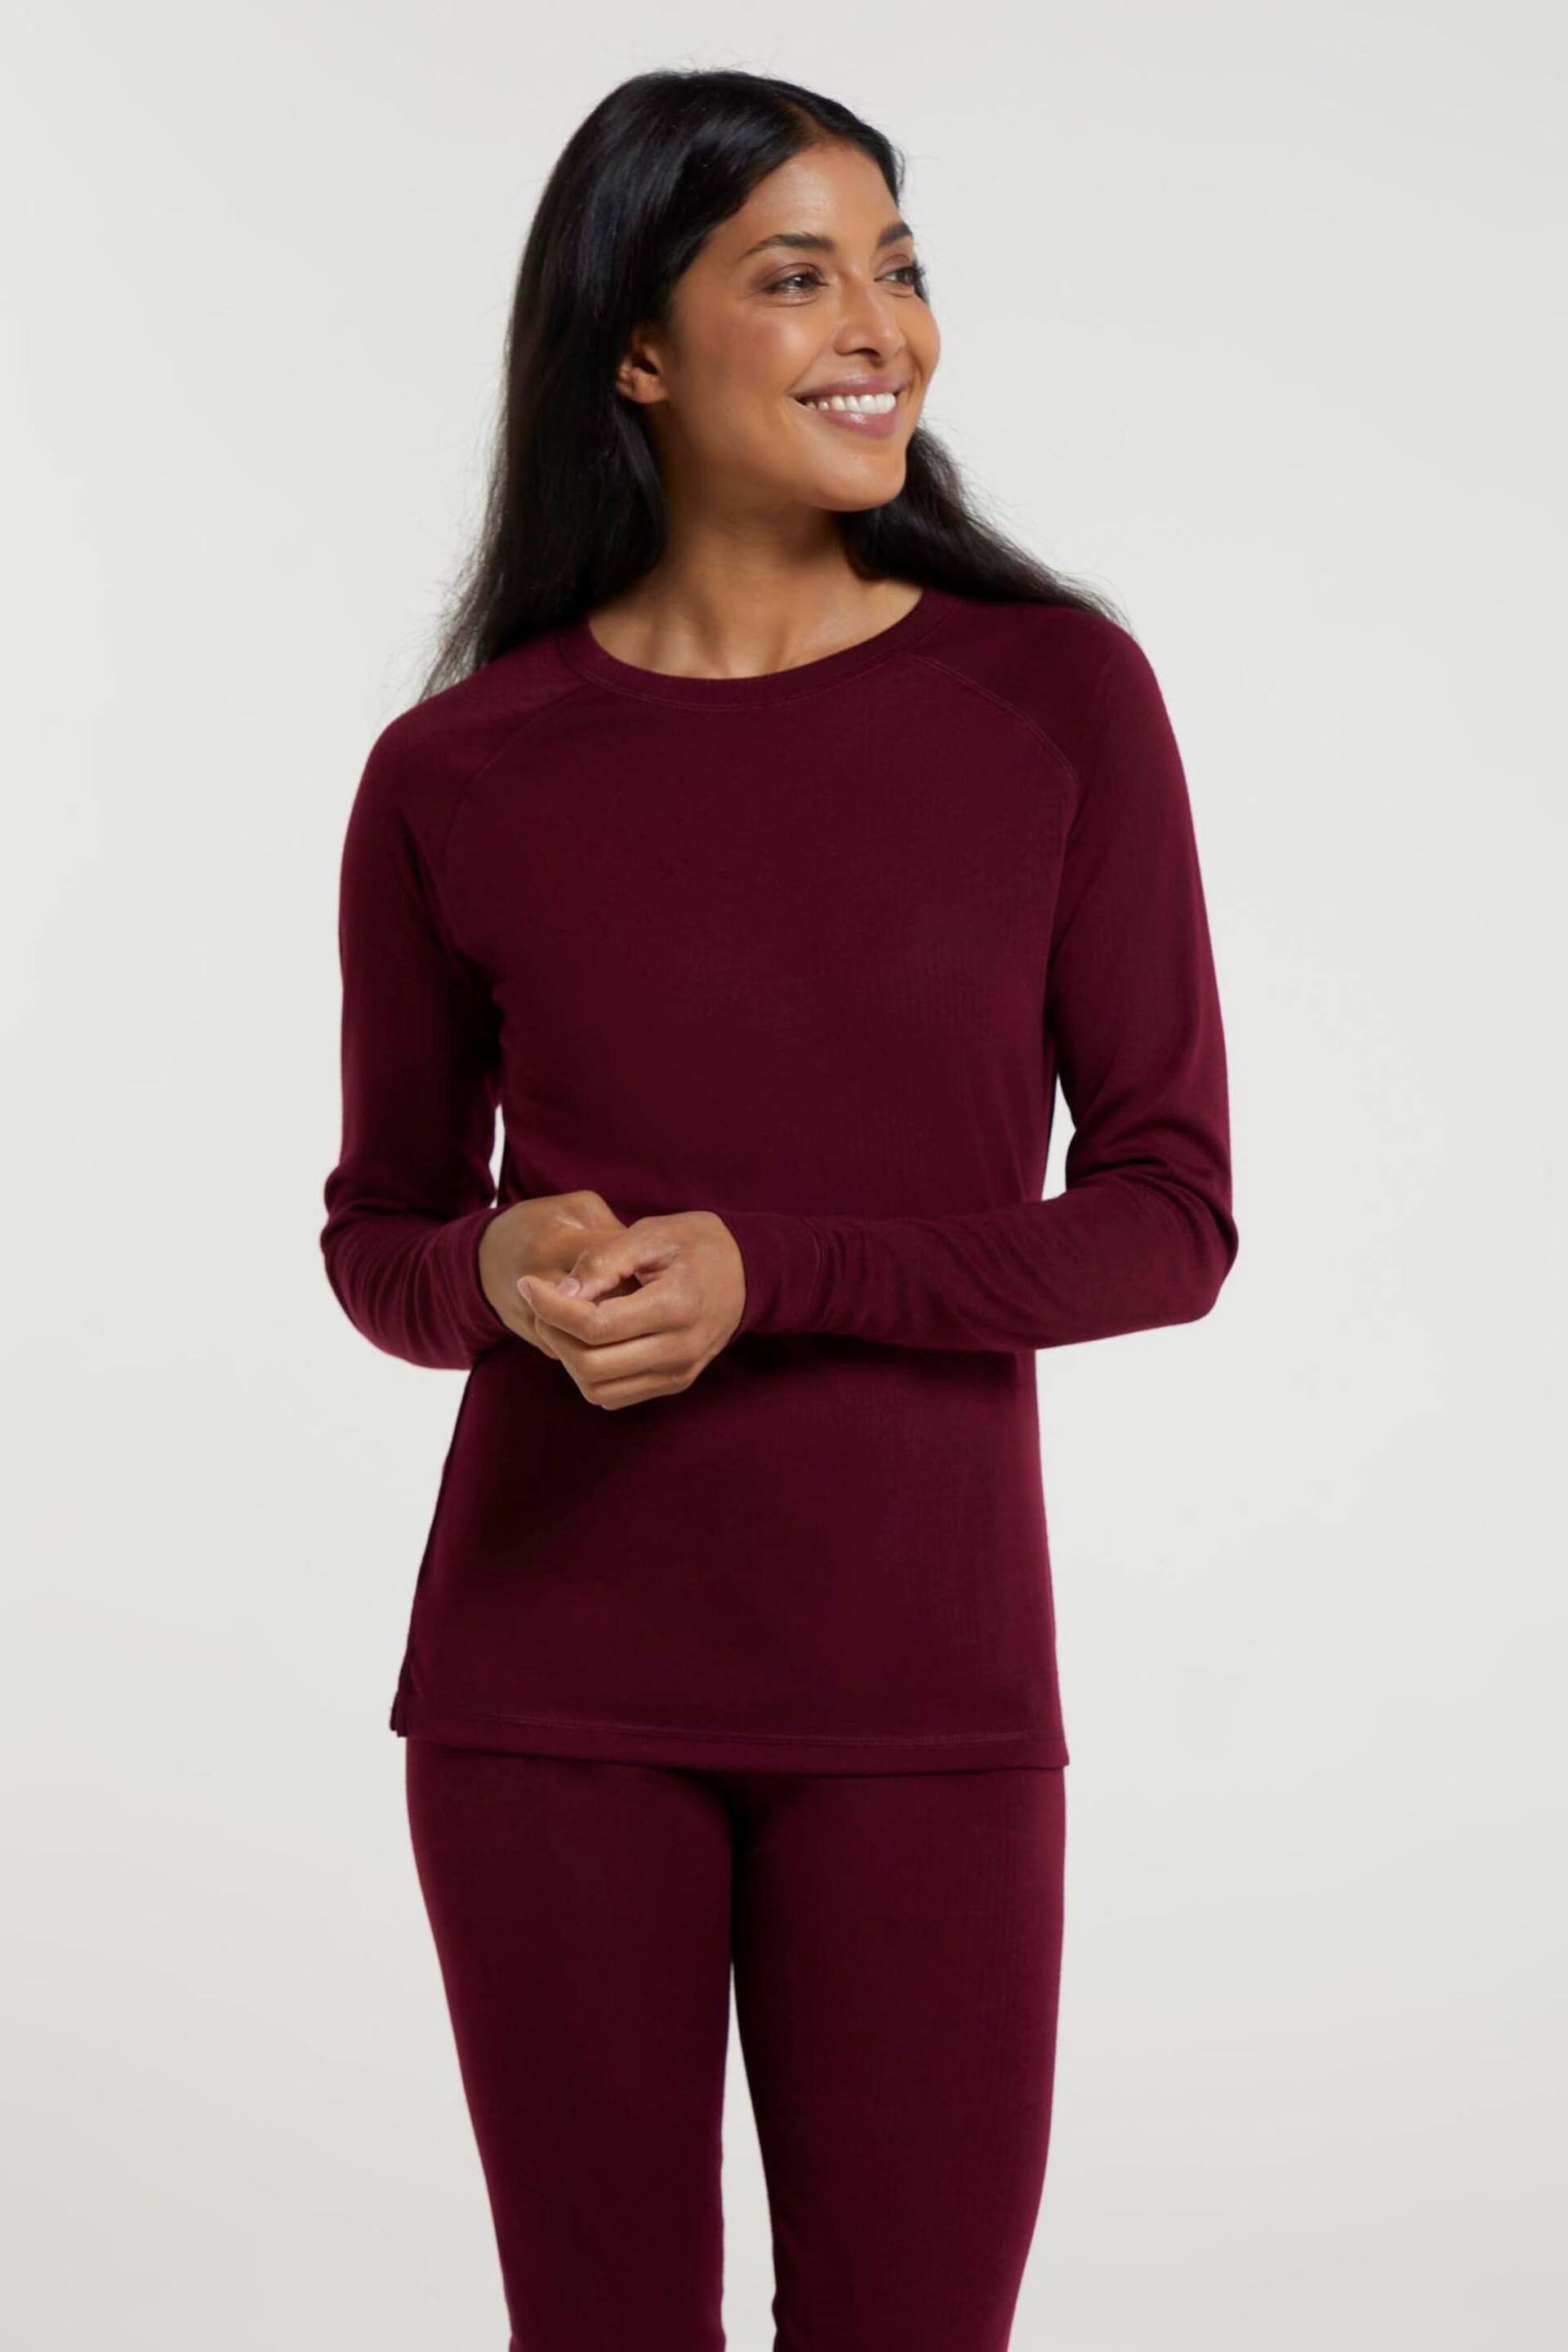 Mountain Warehouse Pink Womens Talus Round Neck Thermal Top - Image 3 of 7